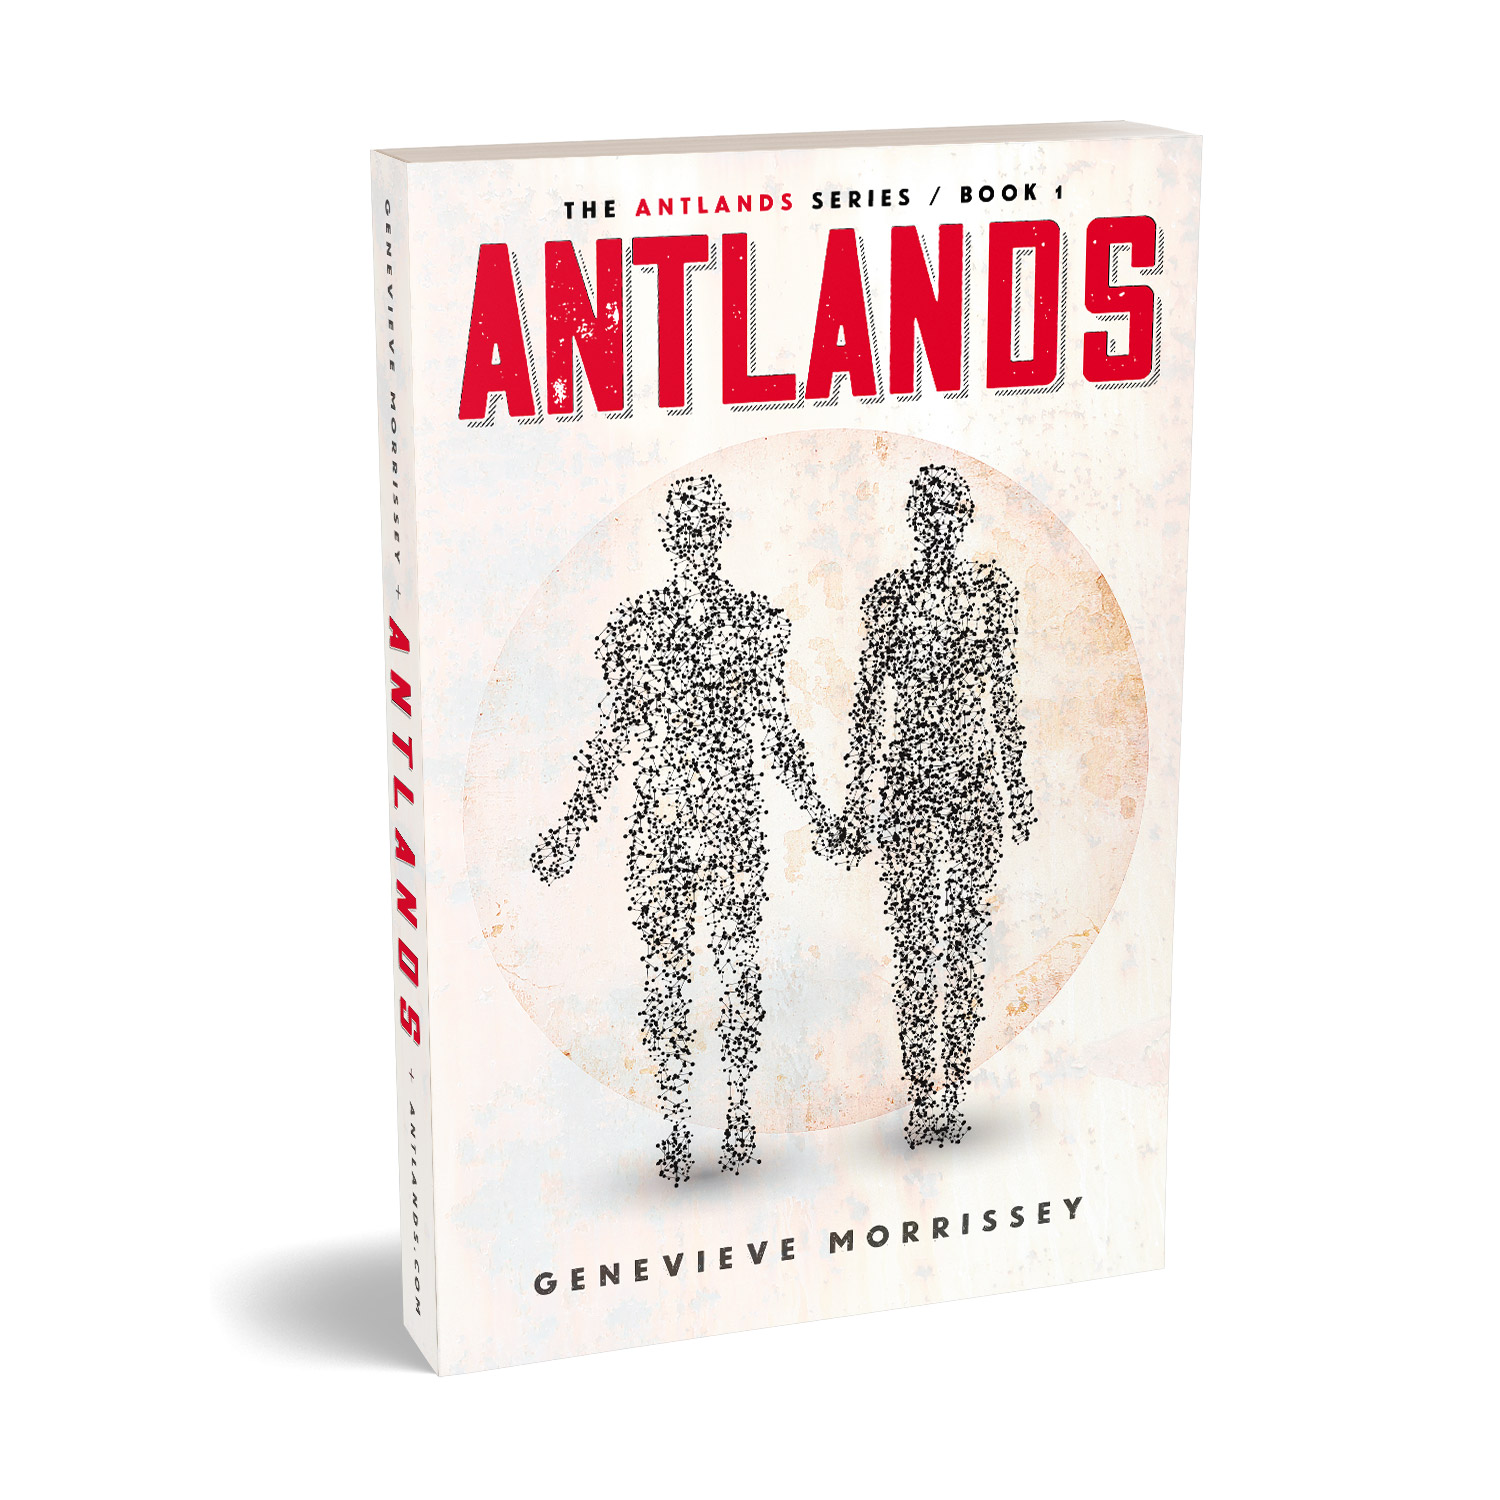 'Antlands' is an immersive, post-apocalyse scifi novel. The author is Genevieve Morrissey. The book cover design and interior formatting are by Mark Thomas. To learn more about what Mark could do for your book, please visit coverness.com.